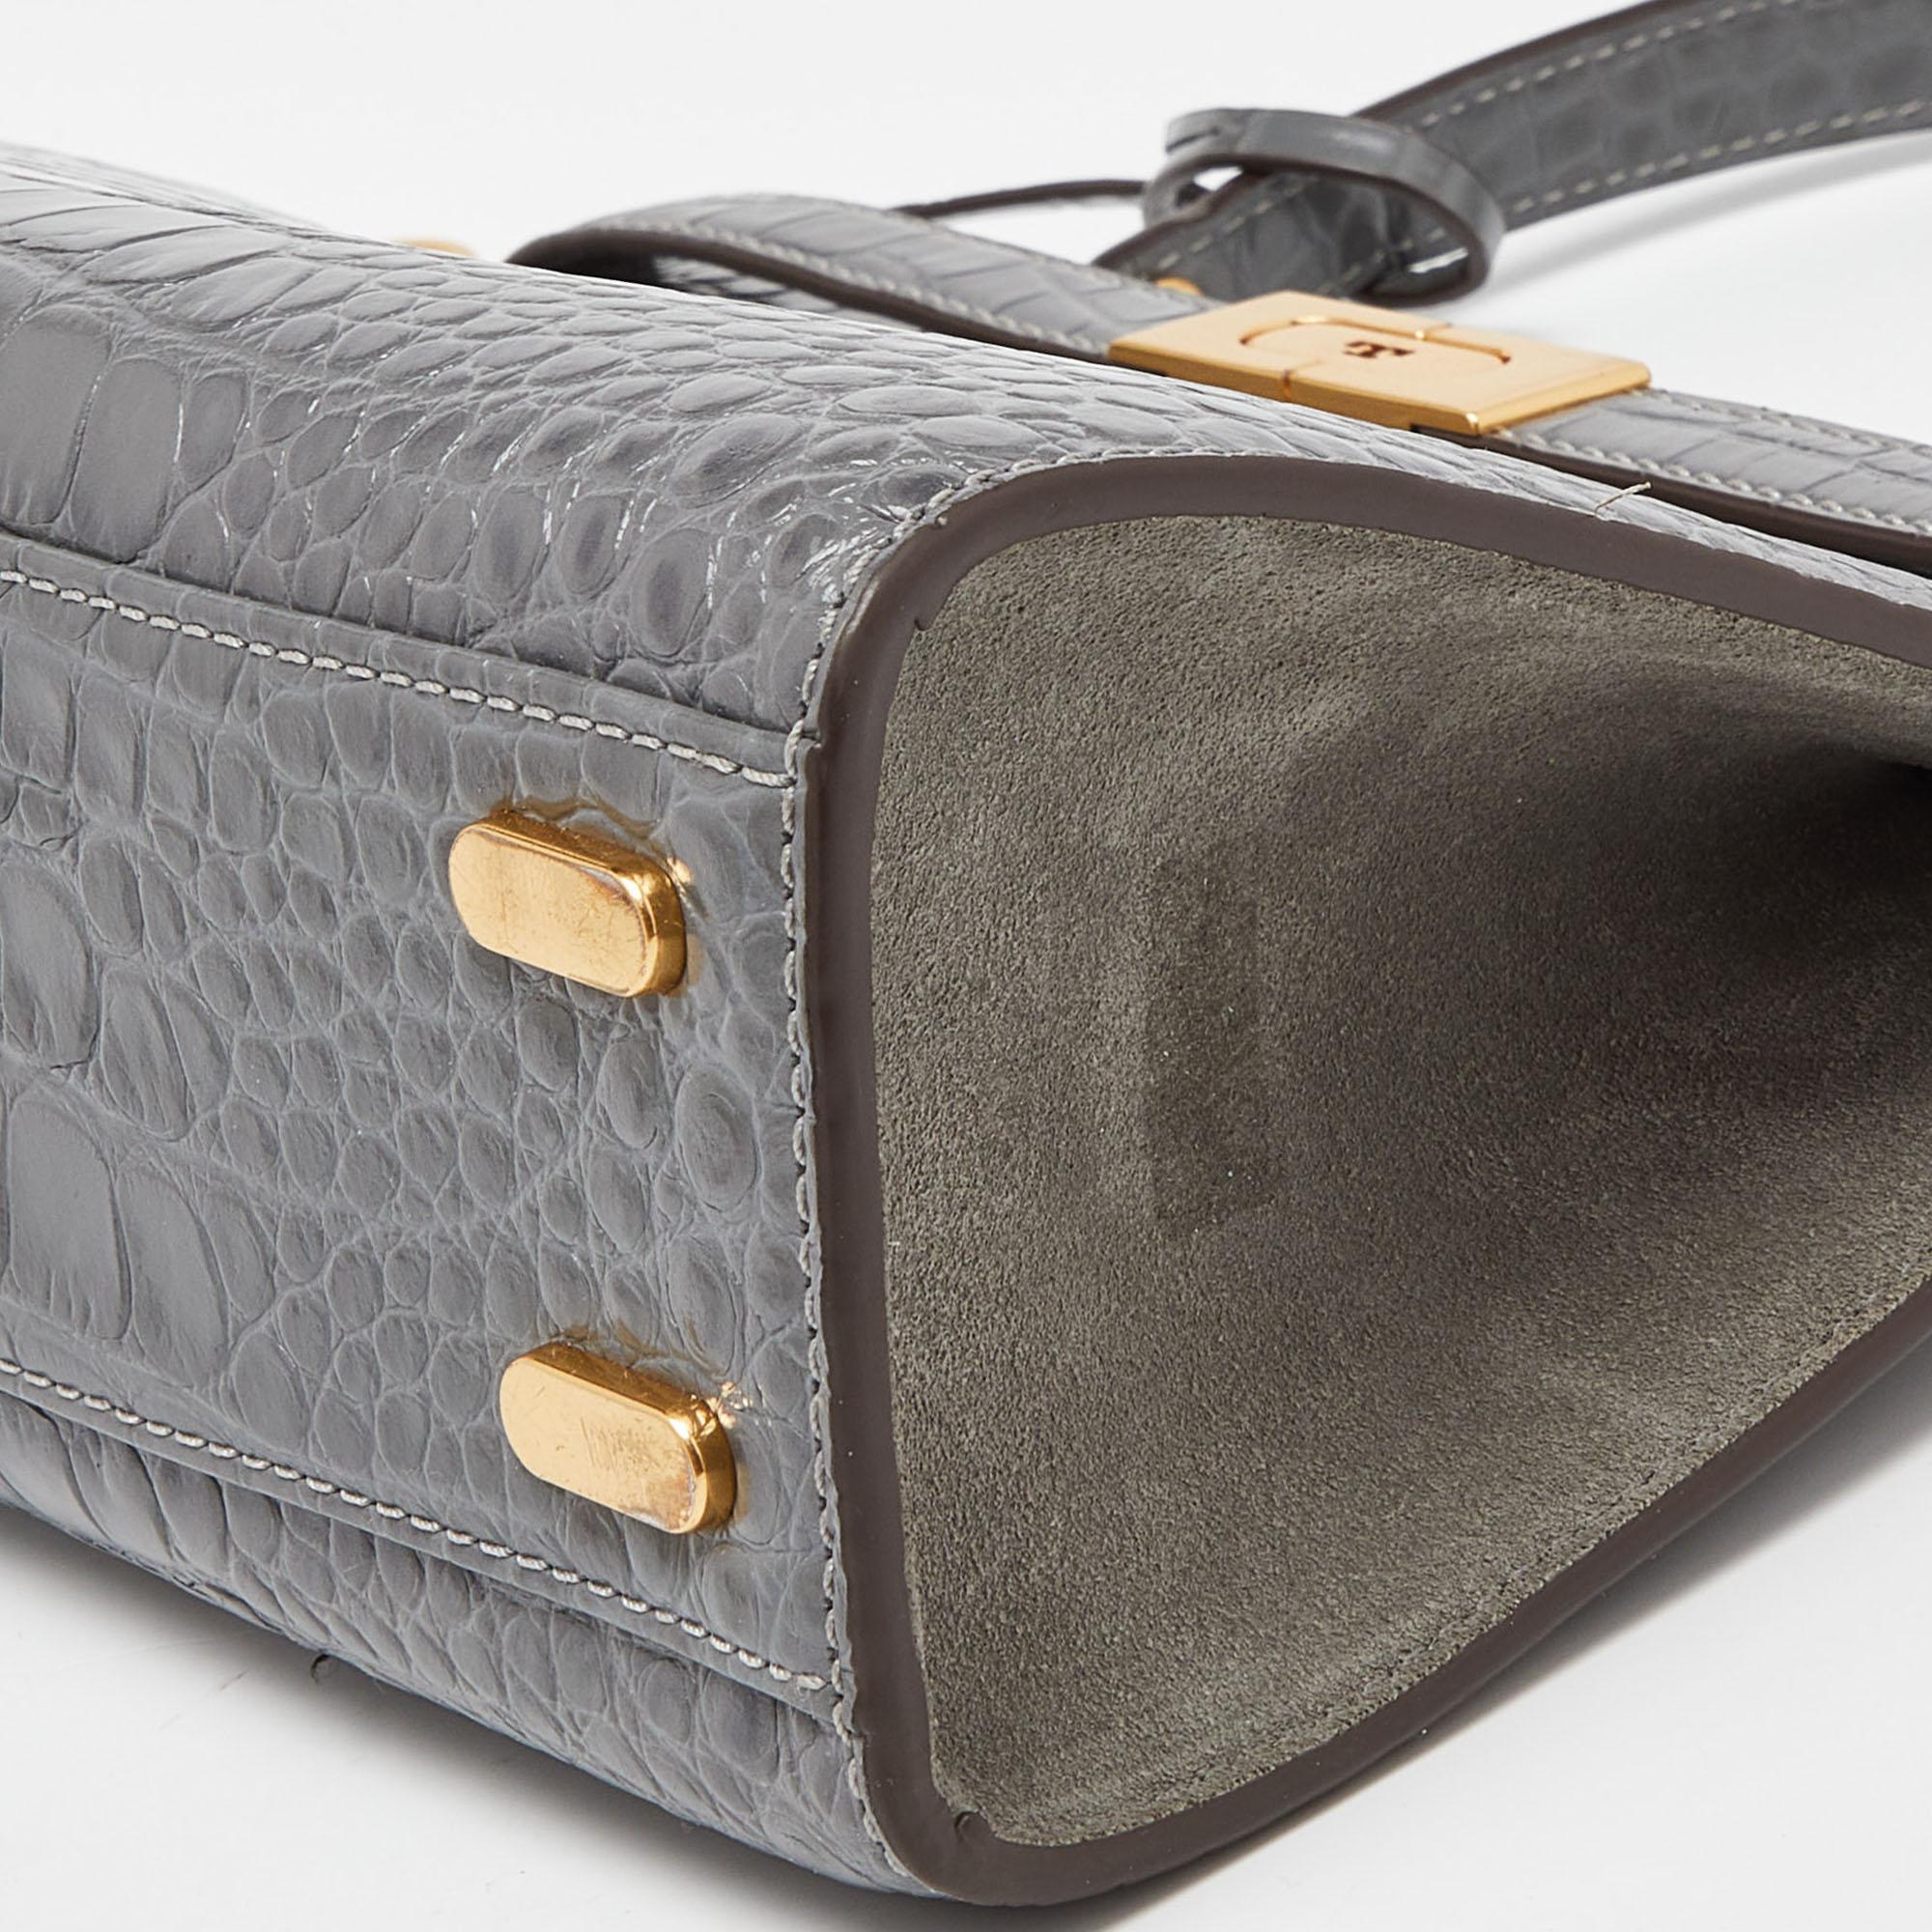 Tory Burch Grey Croc Embossed Leather Small Lee Radziwill Top Handle Bag For Sale 3